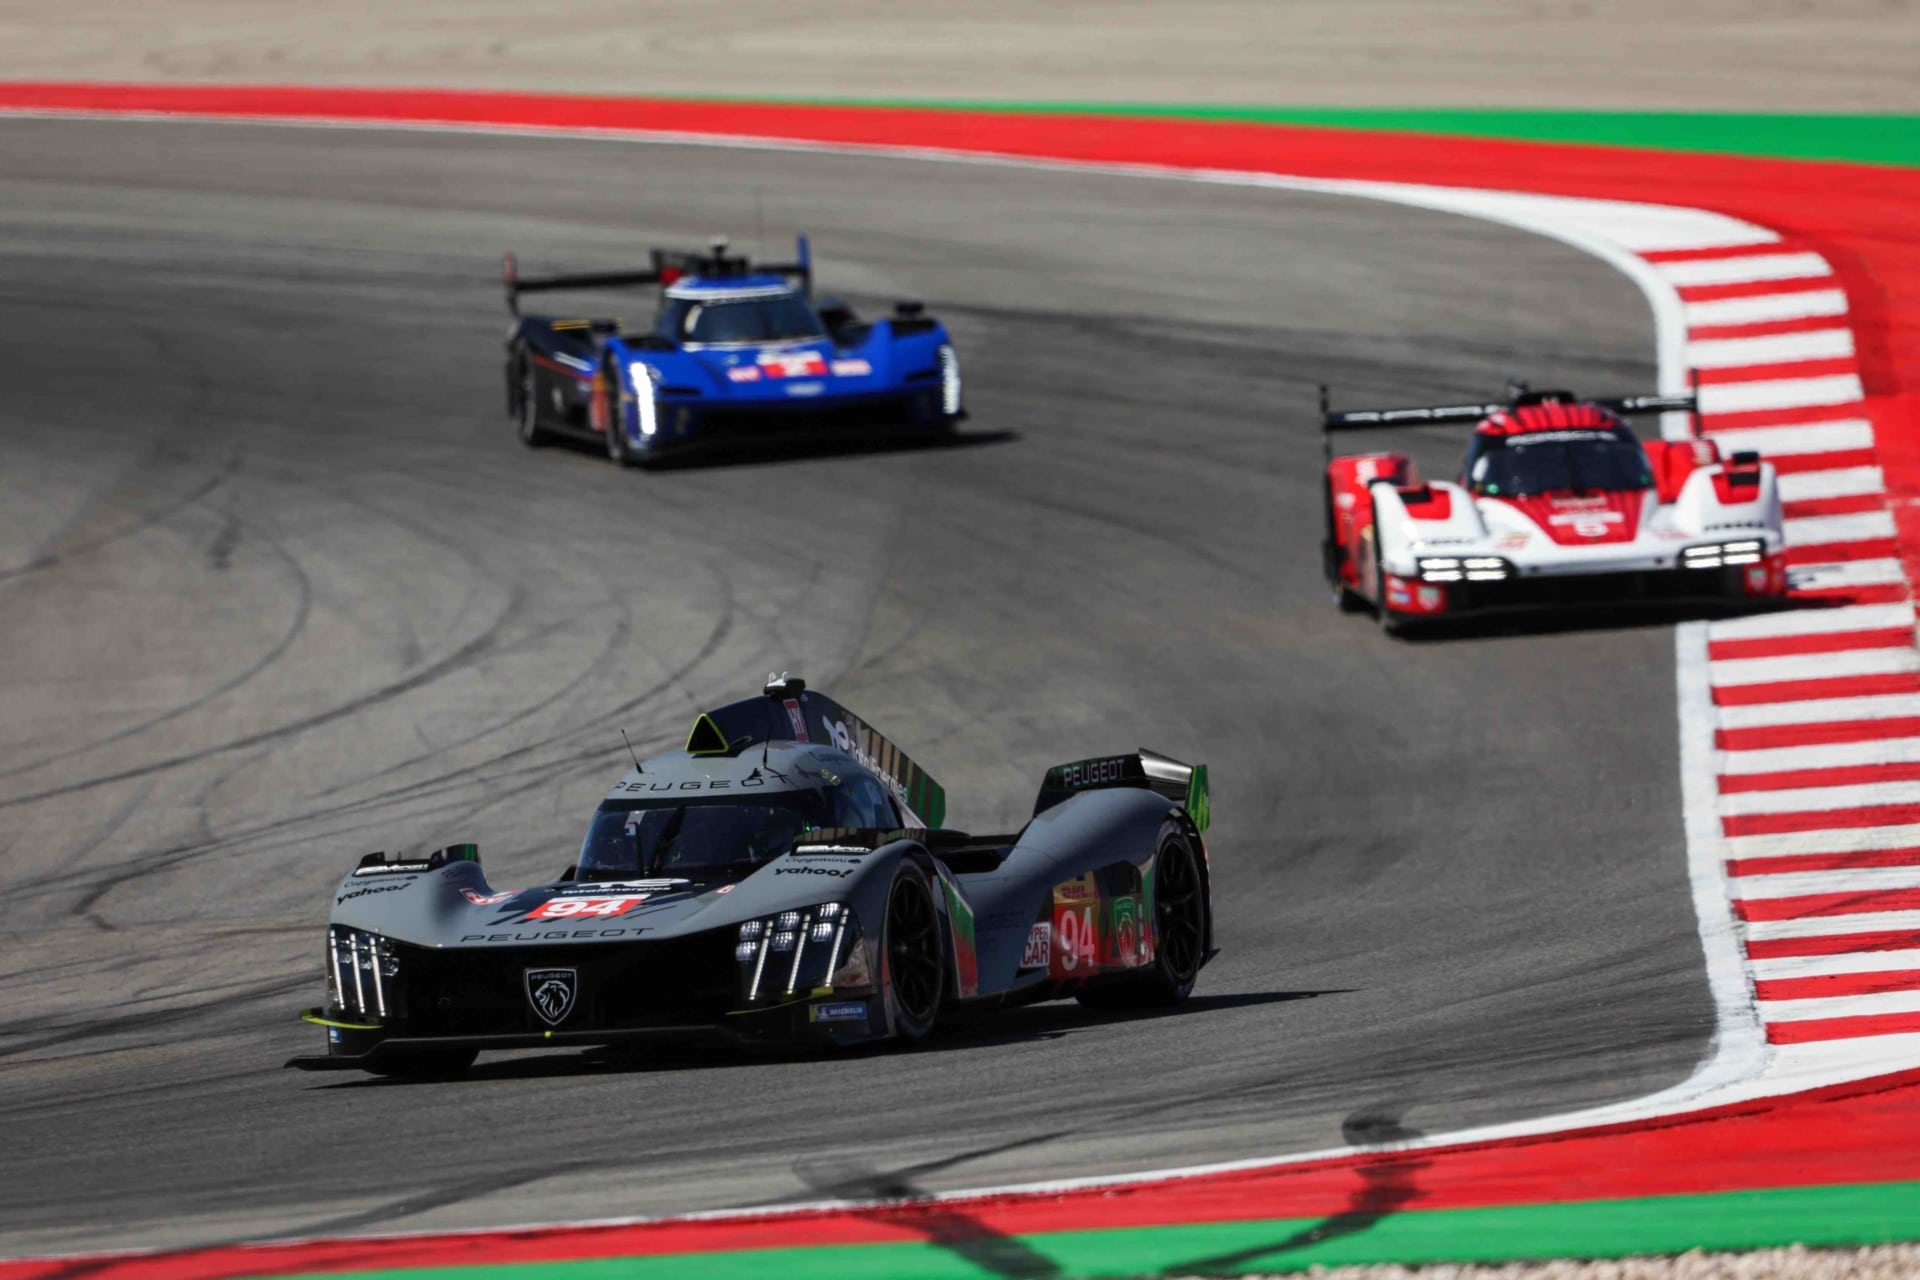 In Pictures: Highlights of 2023 FIA World Endurance Championship